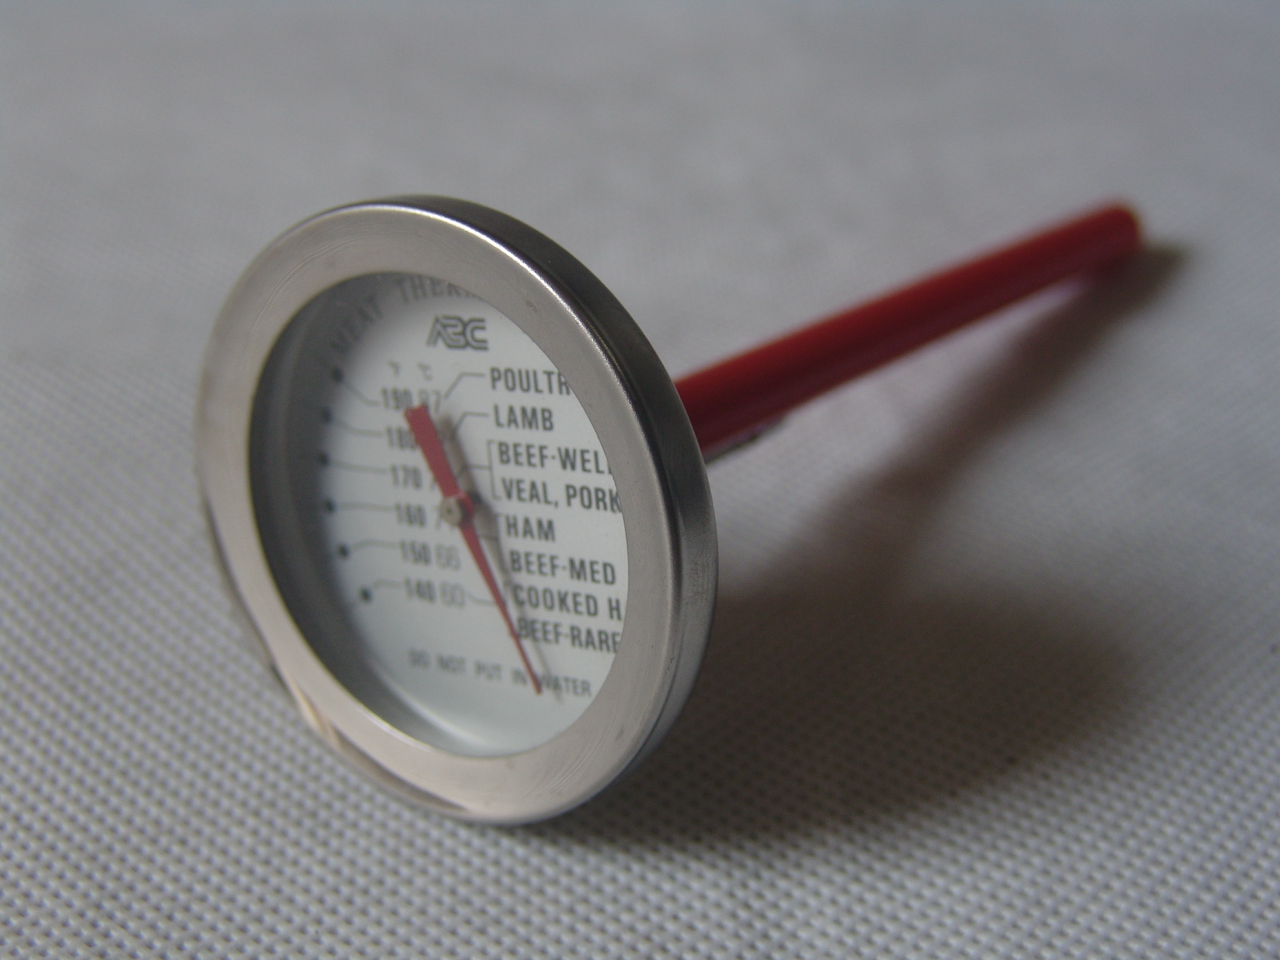 Robertshaw Deep Freezer Thermometer with Fork Kitchen Thermometer